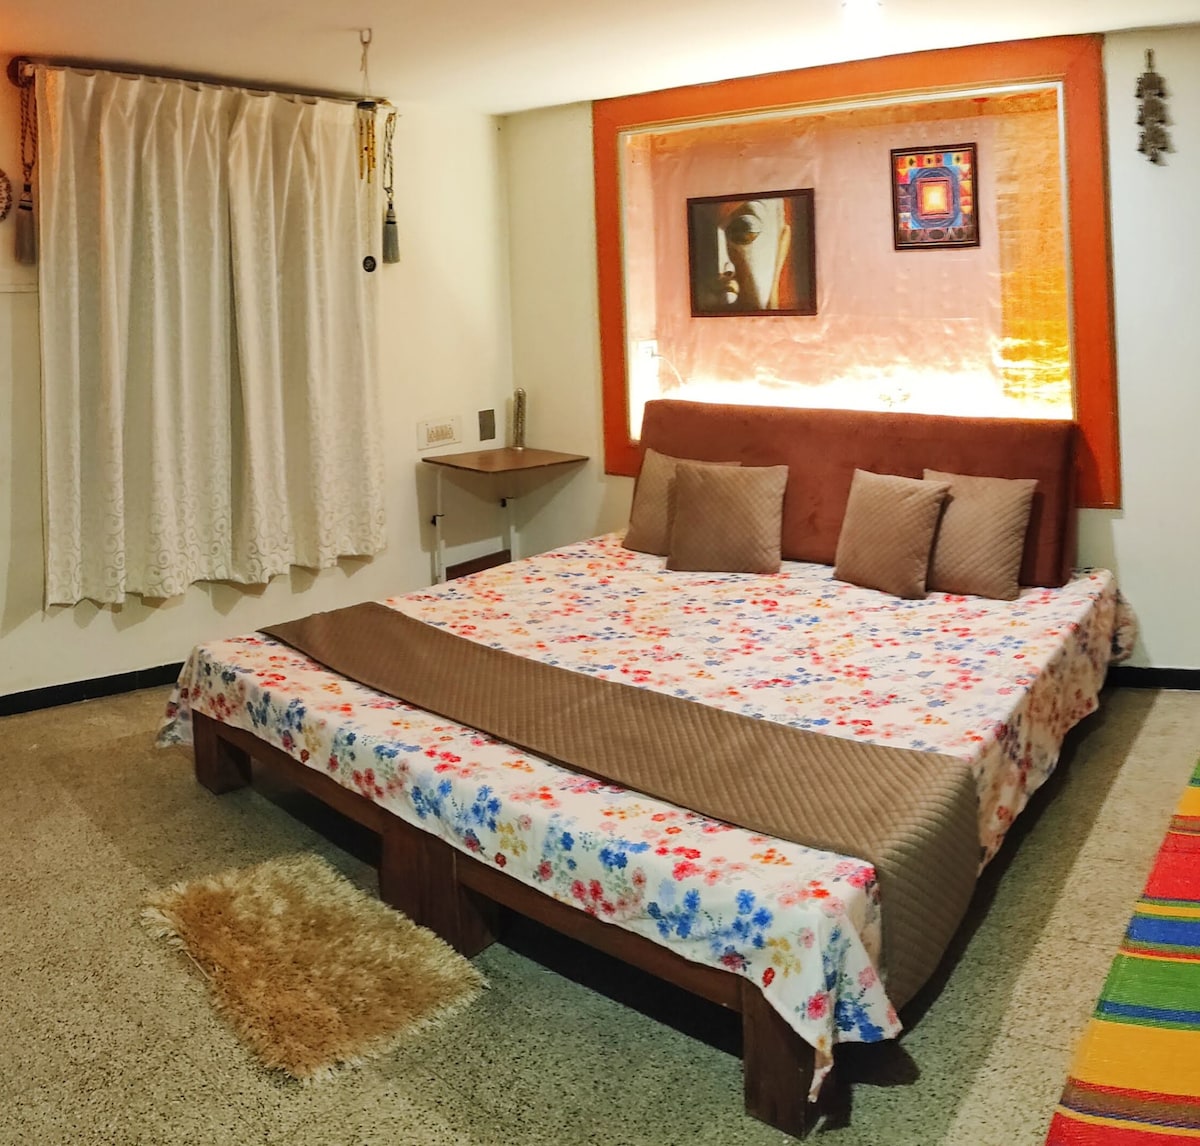 1 AC bedroom at a beautiful homestay in Mysore